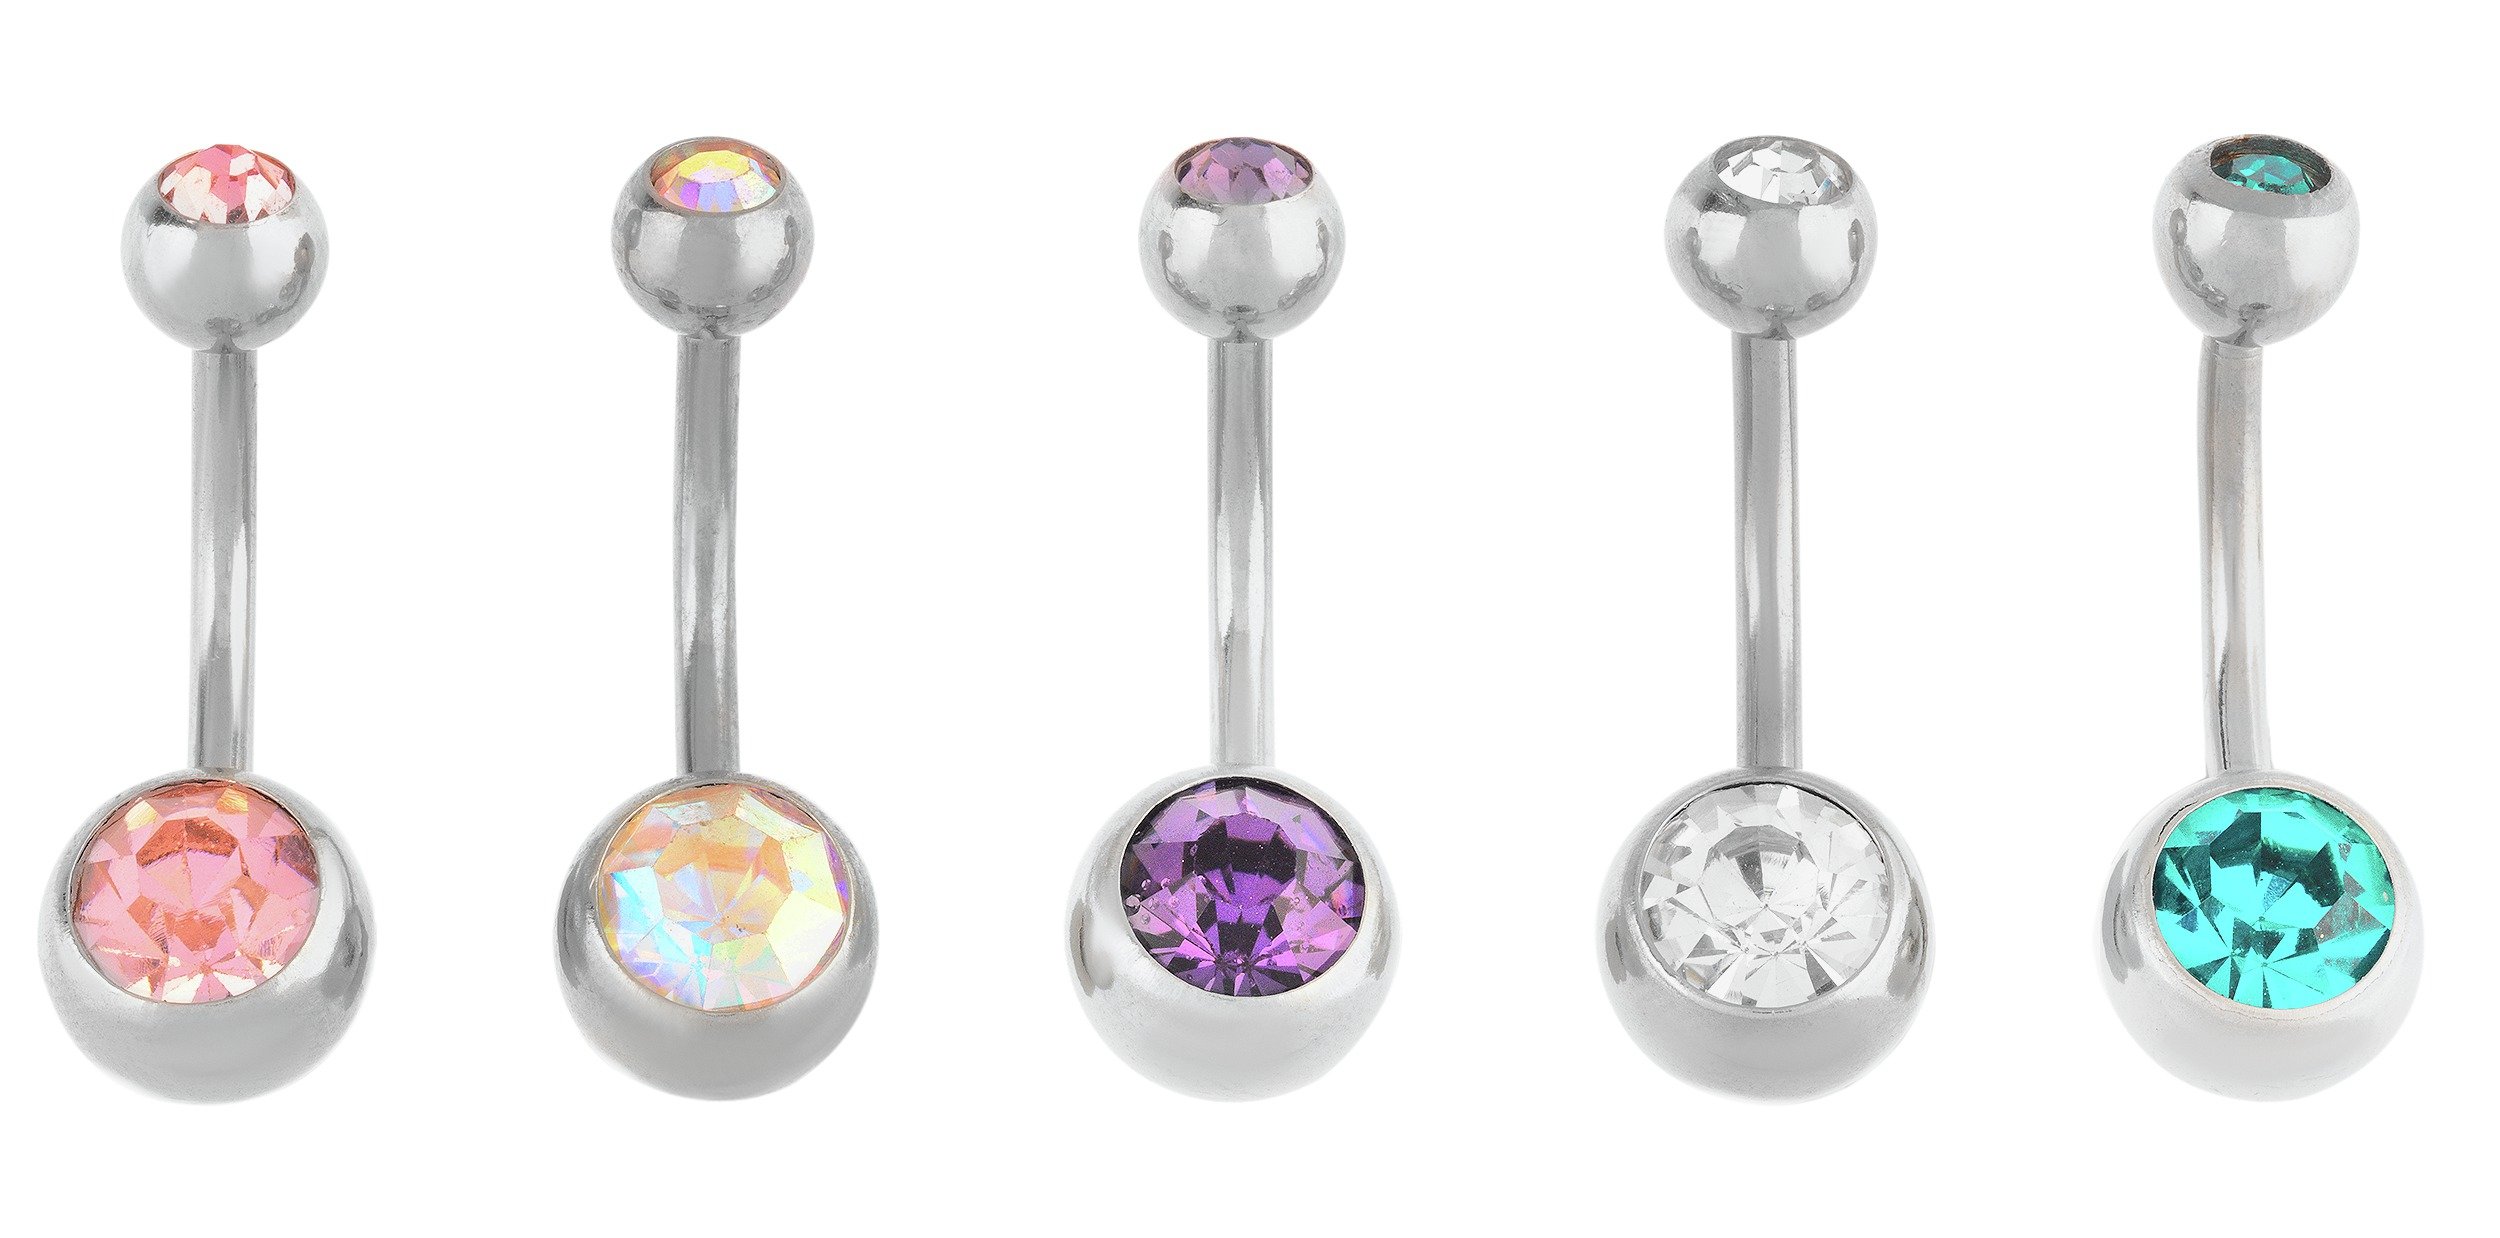 State of Mine Stainless Steel CZ Belly Bars - Set of 5